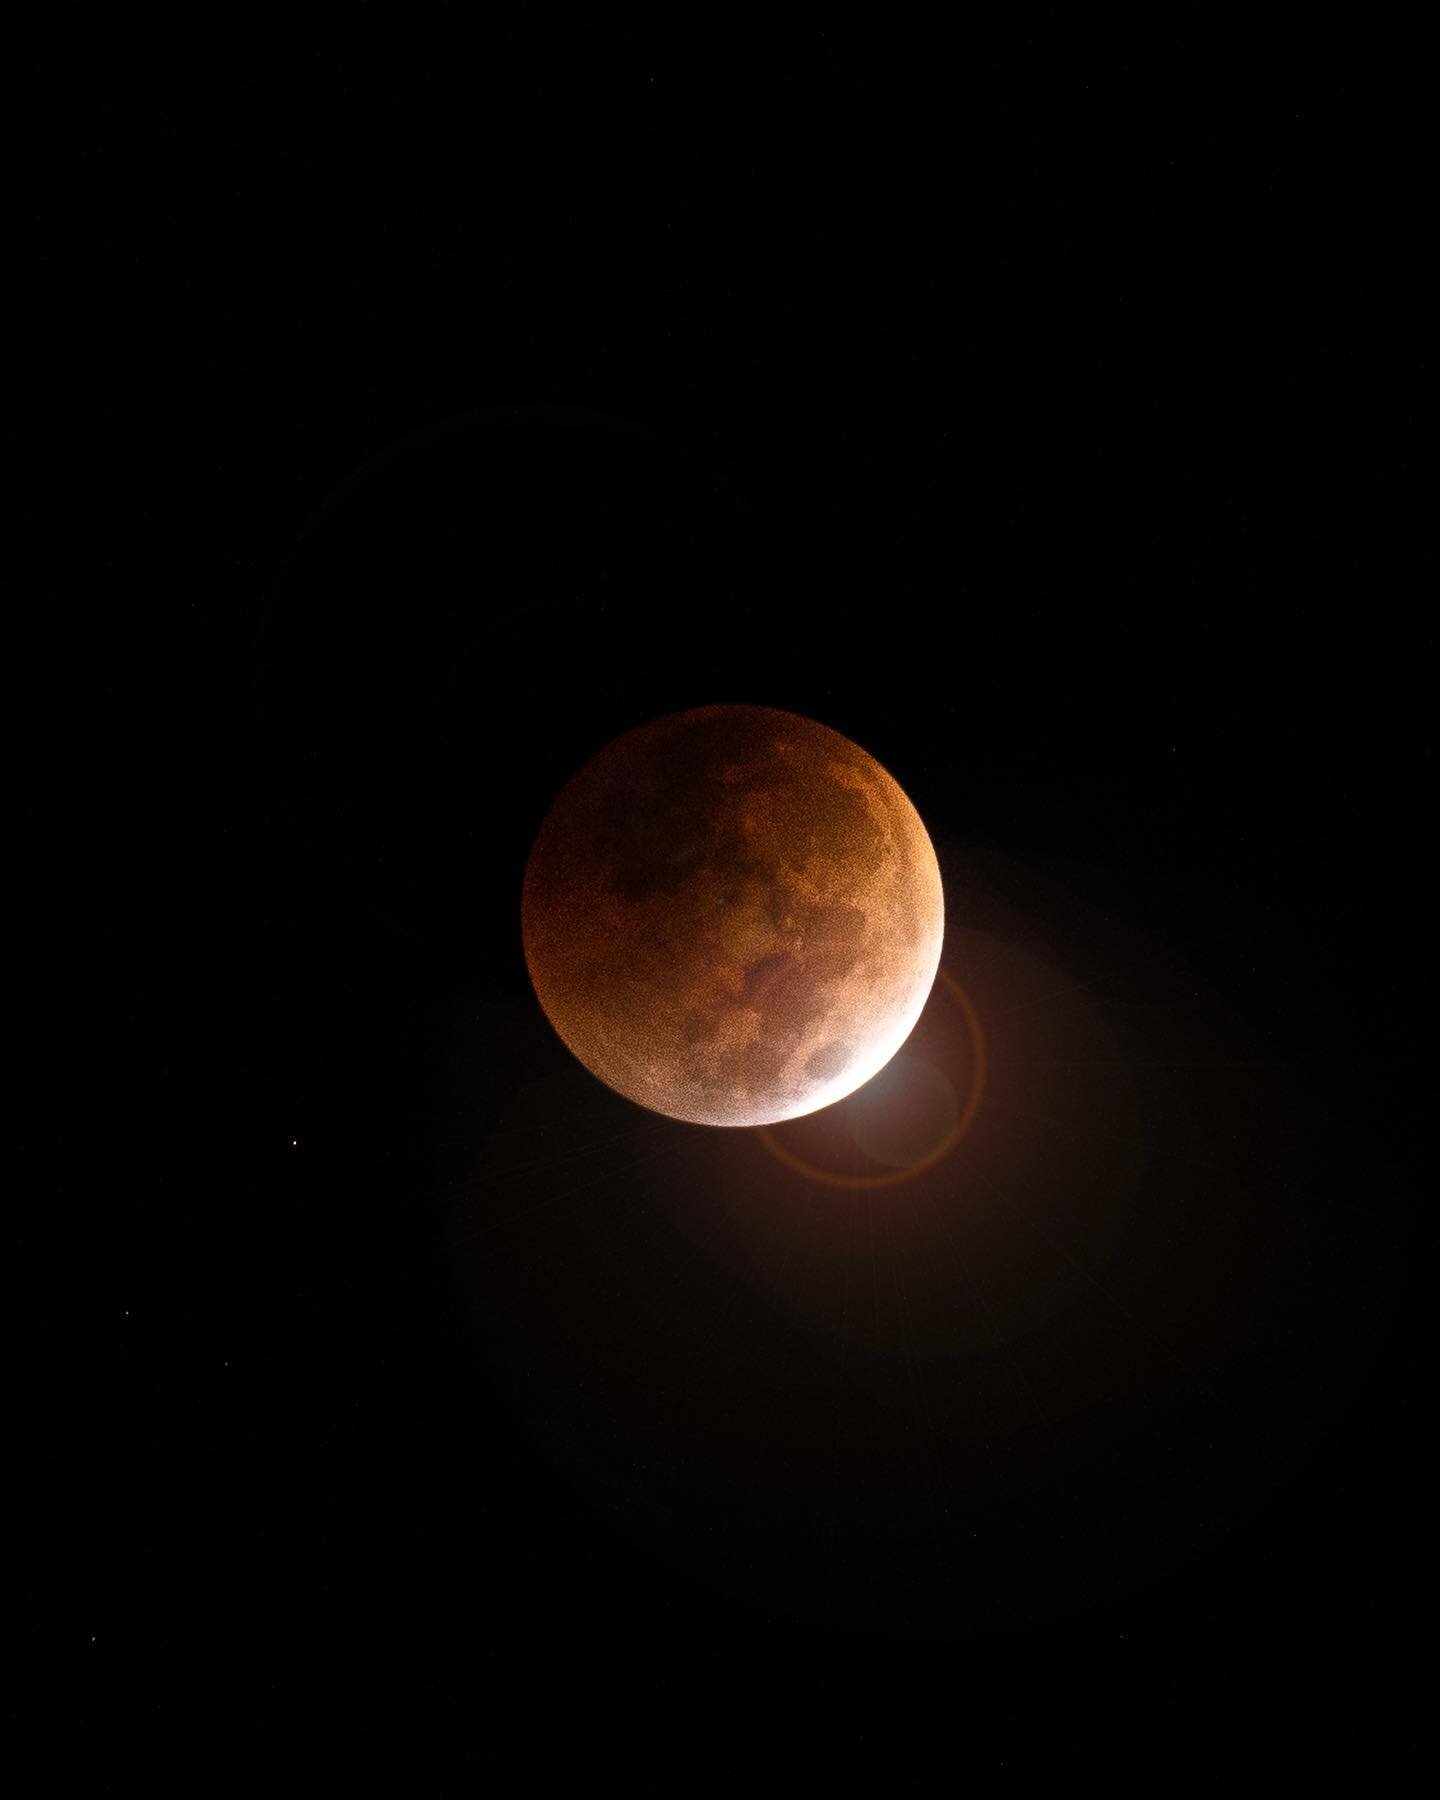 The heavens declare the glory of God. 

I woke up early and saw that the last lunar eclipse for a couple years was just beginning, so I scrambled to find my longest lens and the tripod. Scroll through to see the progression as the earth passes direct